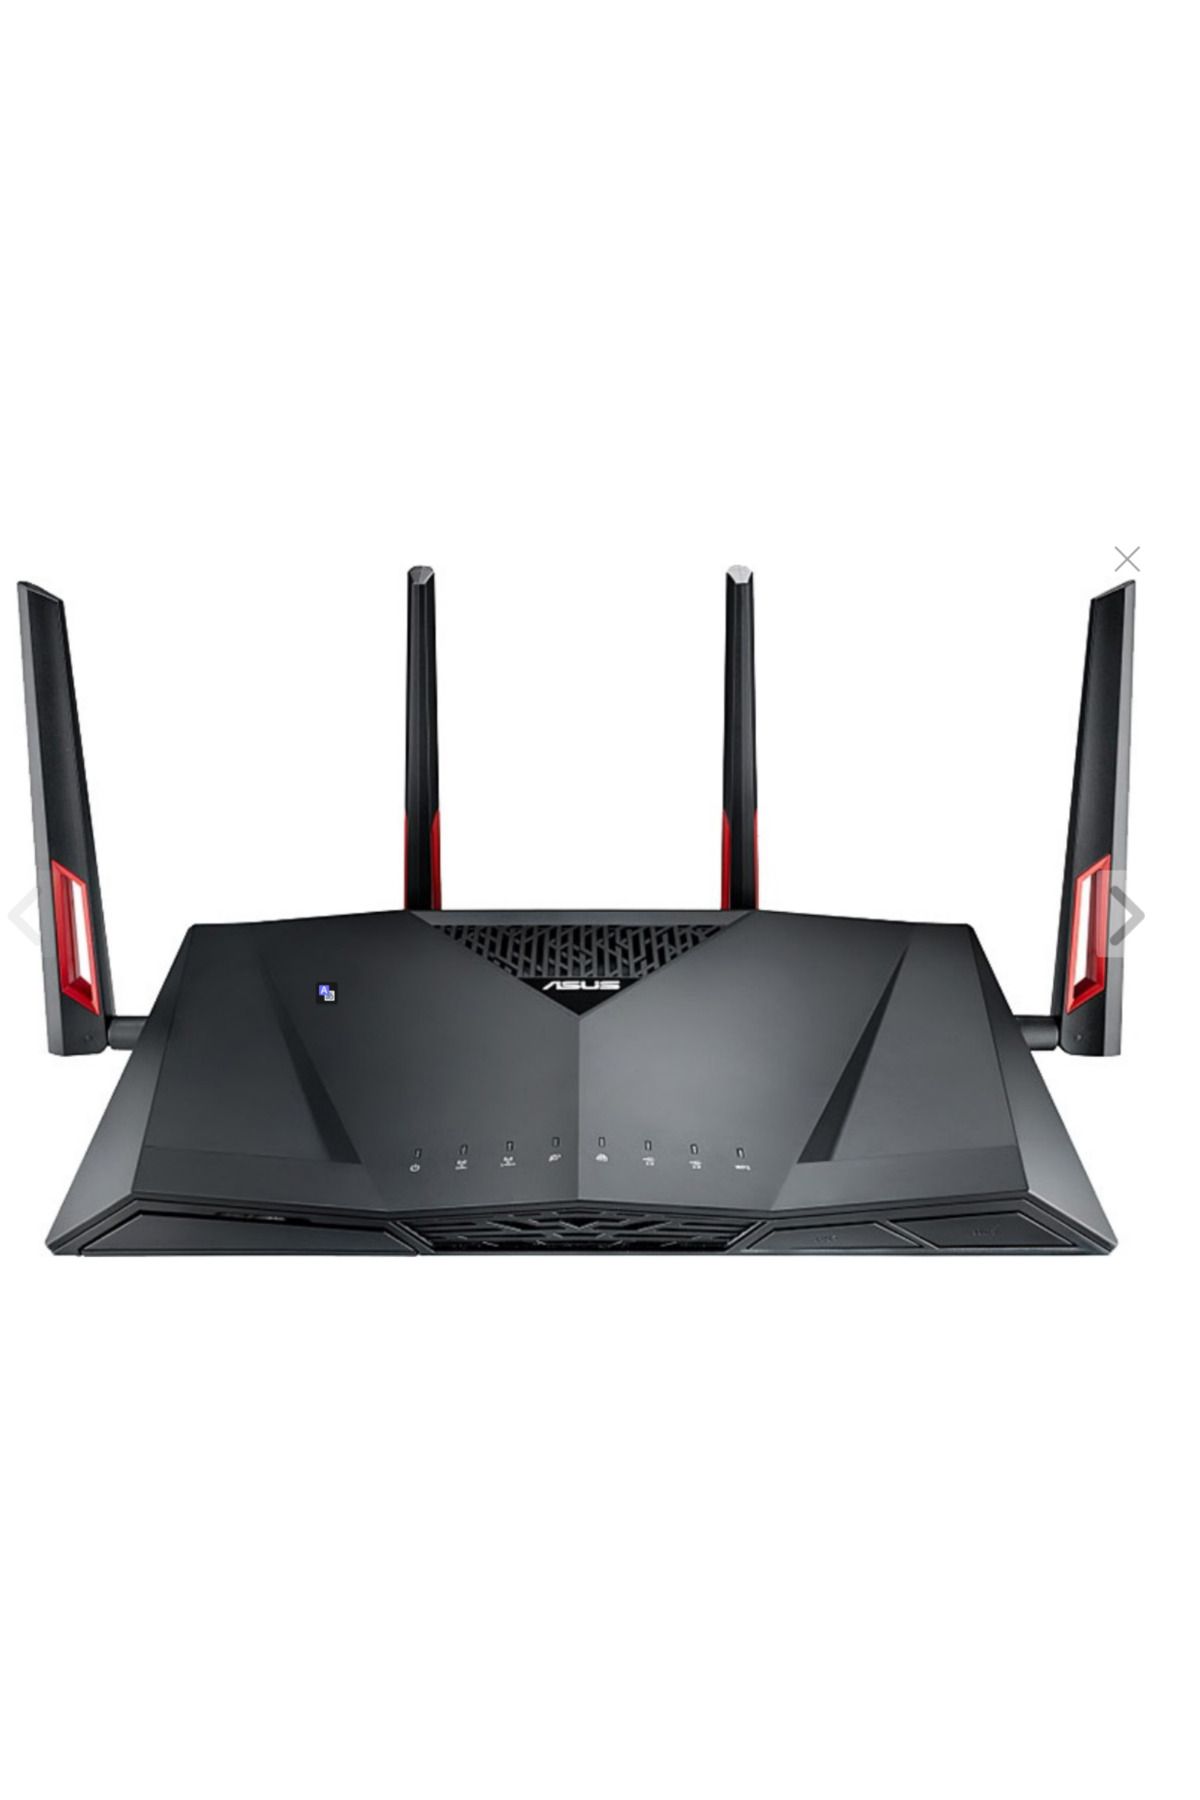 ASUS RT-AC88U 8 Port 3200 Mbps Router